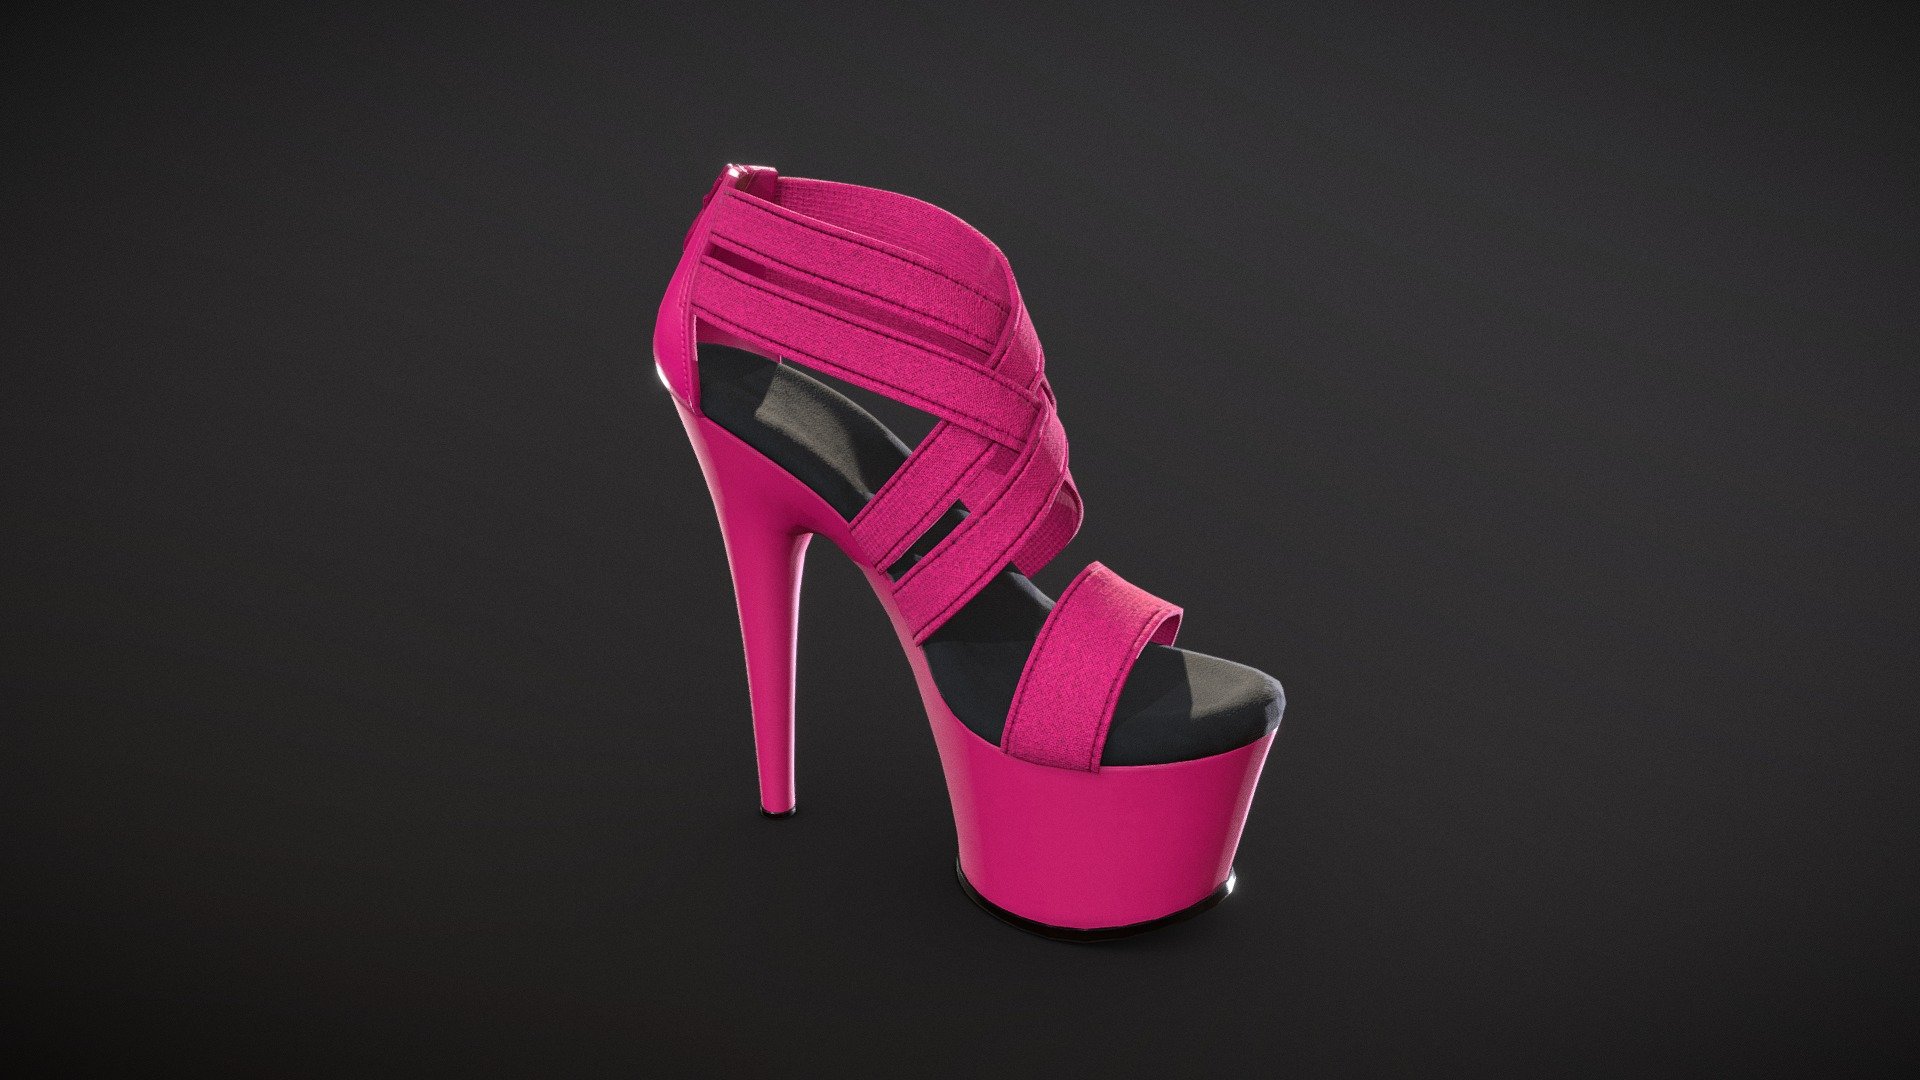 Banded Platform Stiletto Shoes 3

Game and production ready, polycount optimized for quality, ideal for high quality Characters and Close-Ups

Internal parts modeled and textured, ideal for customization or animation

Basemesh model not included

Single UV space

PBR and UE4 4k Textures

Low Poly has 2.8k quads

FBX, OBJ, ZTL

Includes 4 Color Variations:

Black / Red / White / Pink - Banded Platform Stiletto Shoes 3 - Buy Royalty Free 3D model by Feds452 3d model